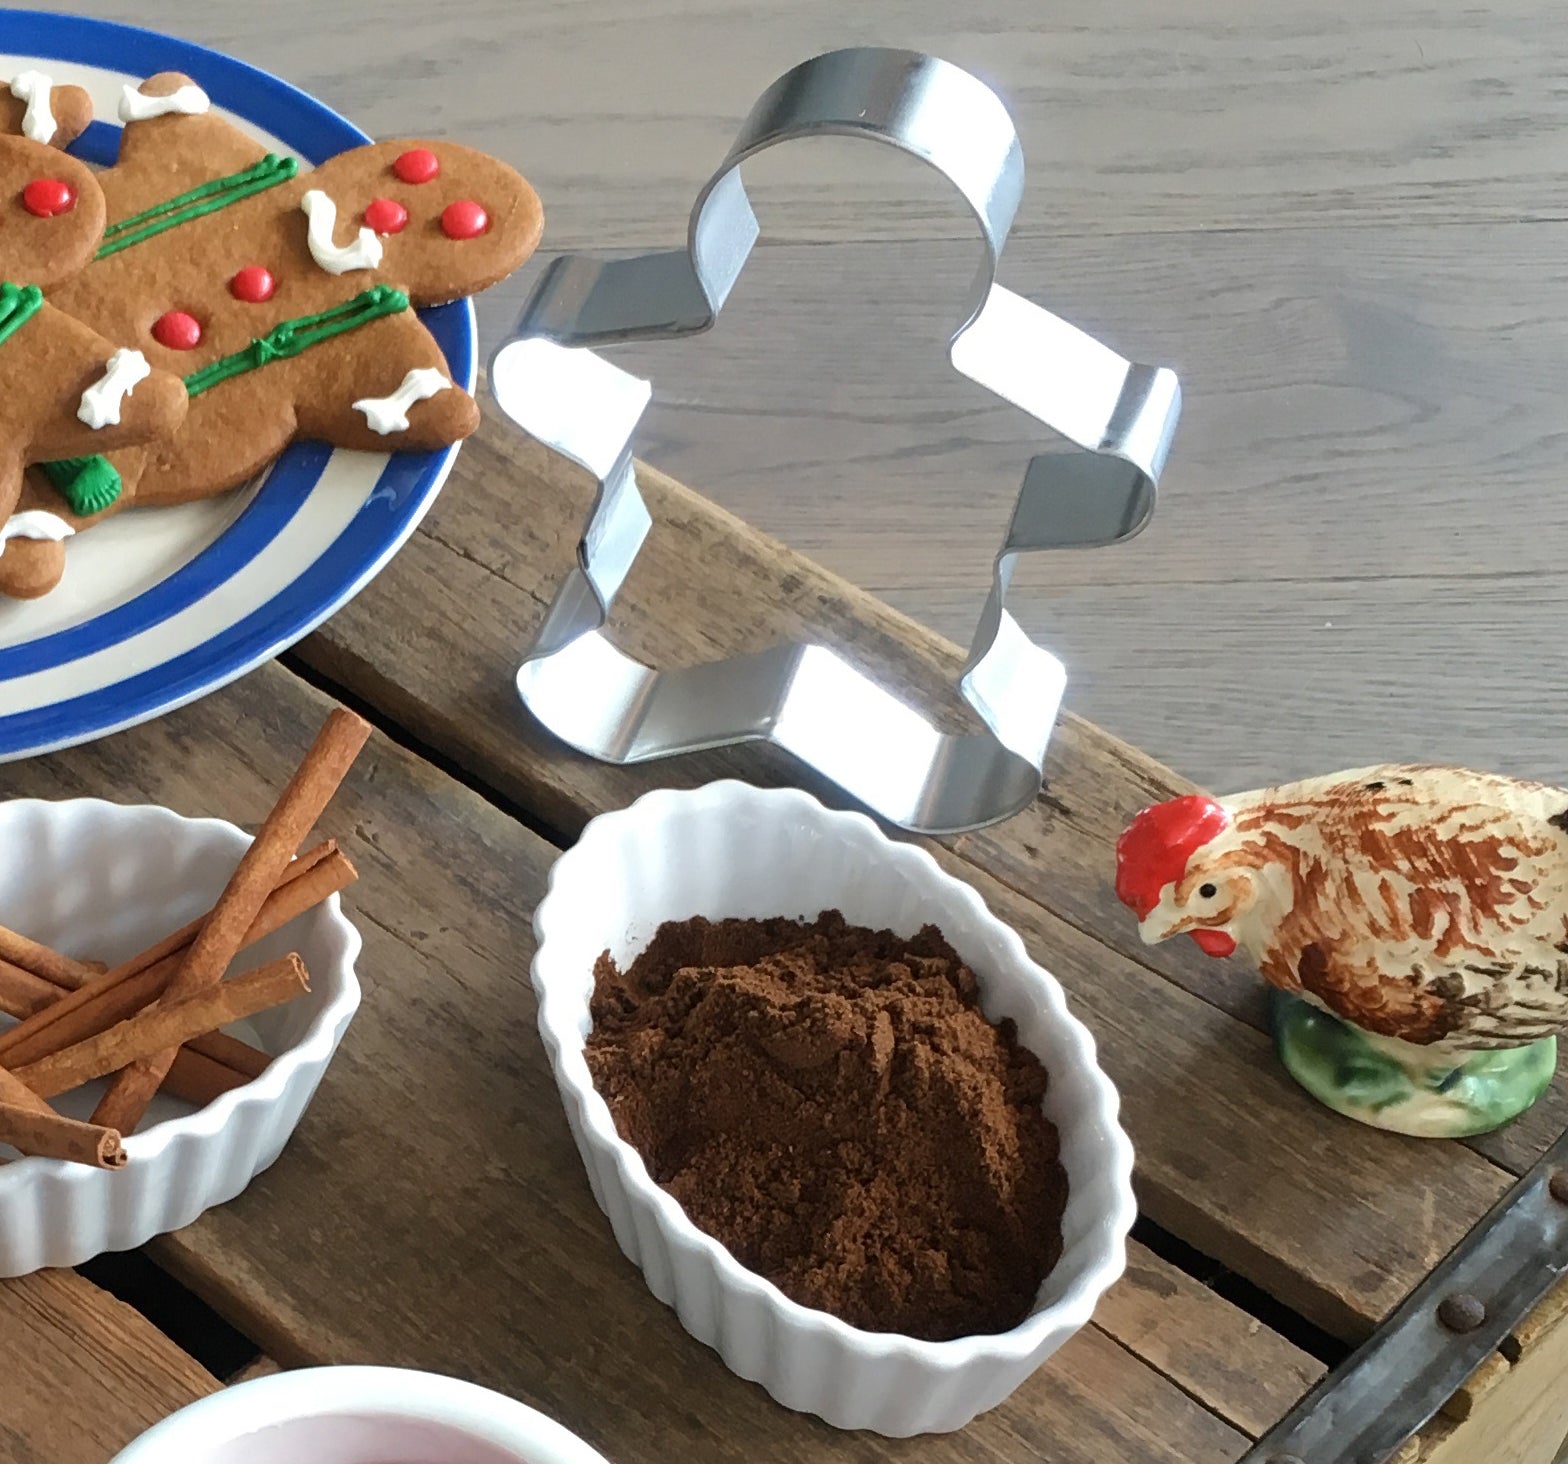 Gingerbread cookie cutter from Ginger's Breadboys